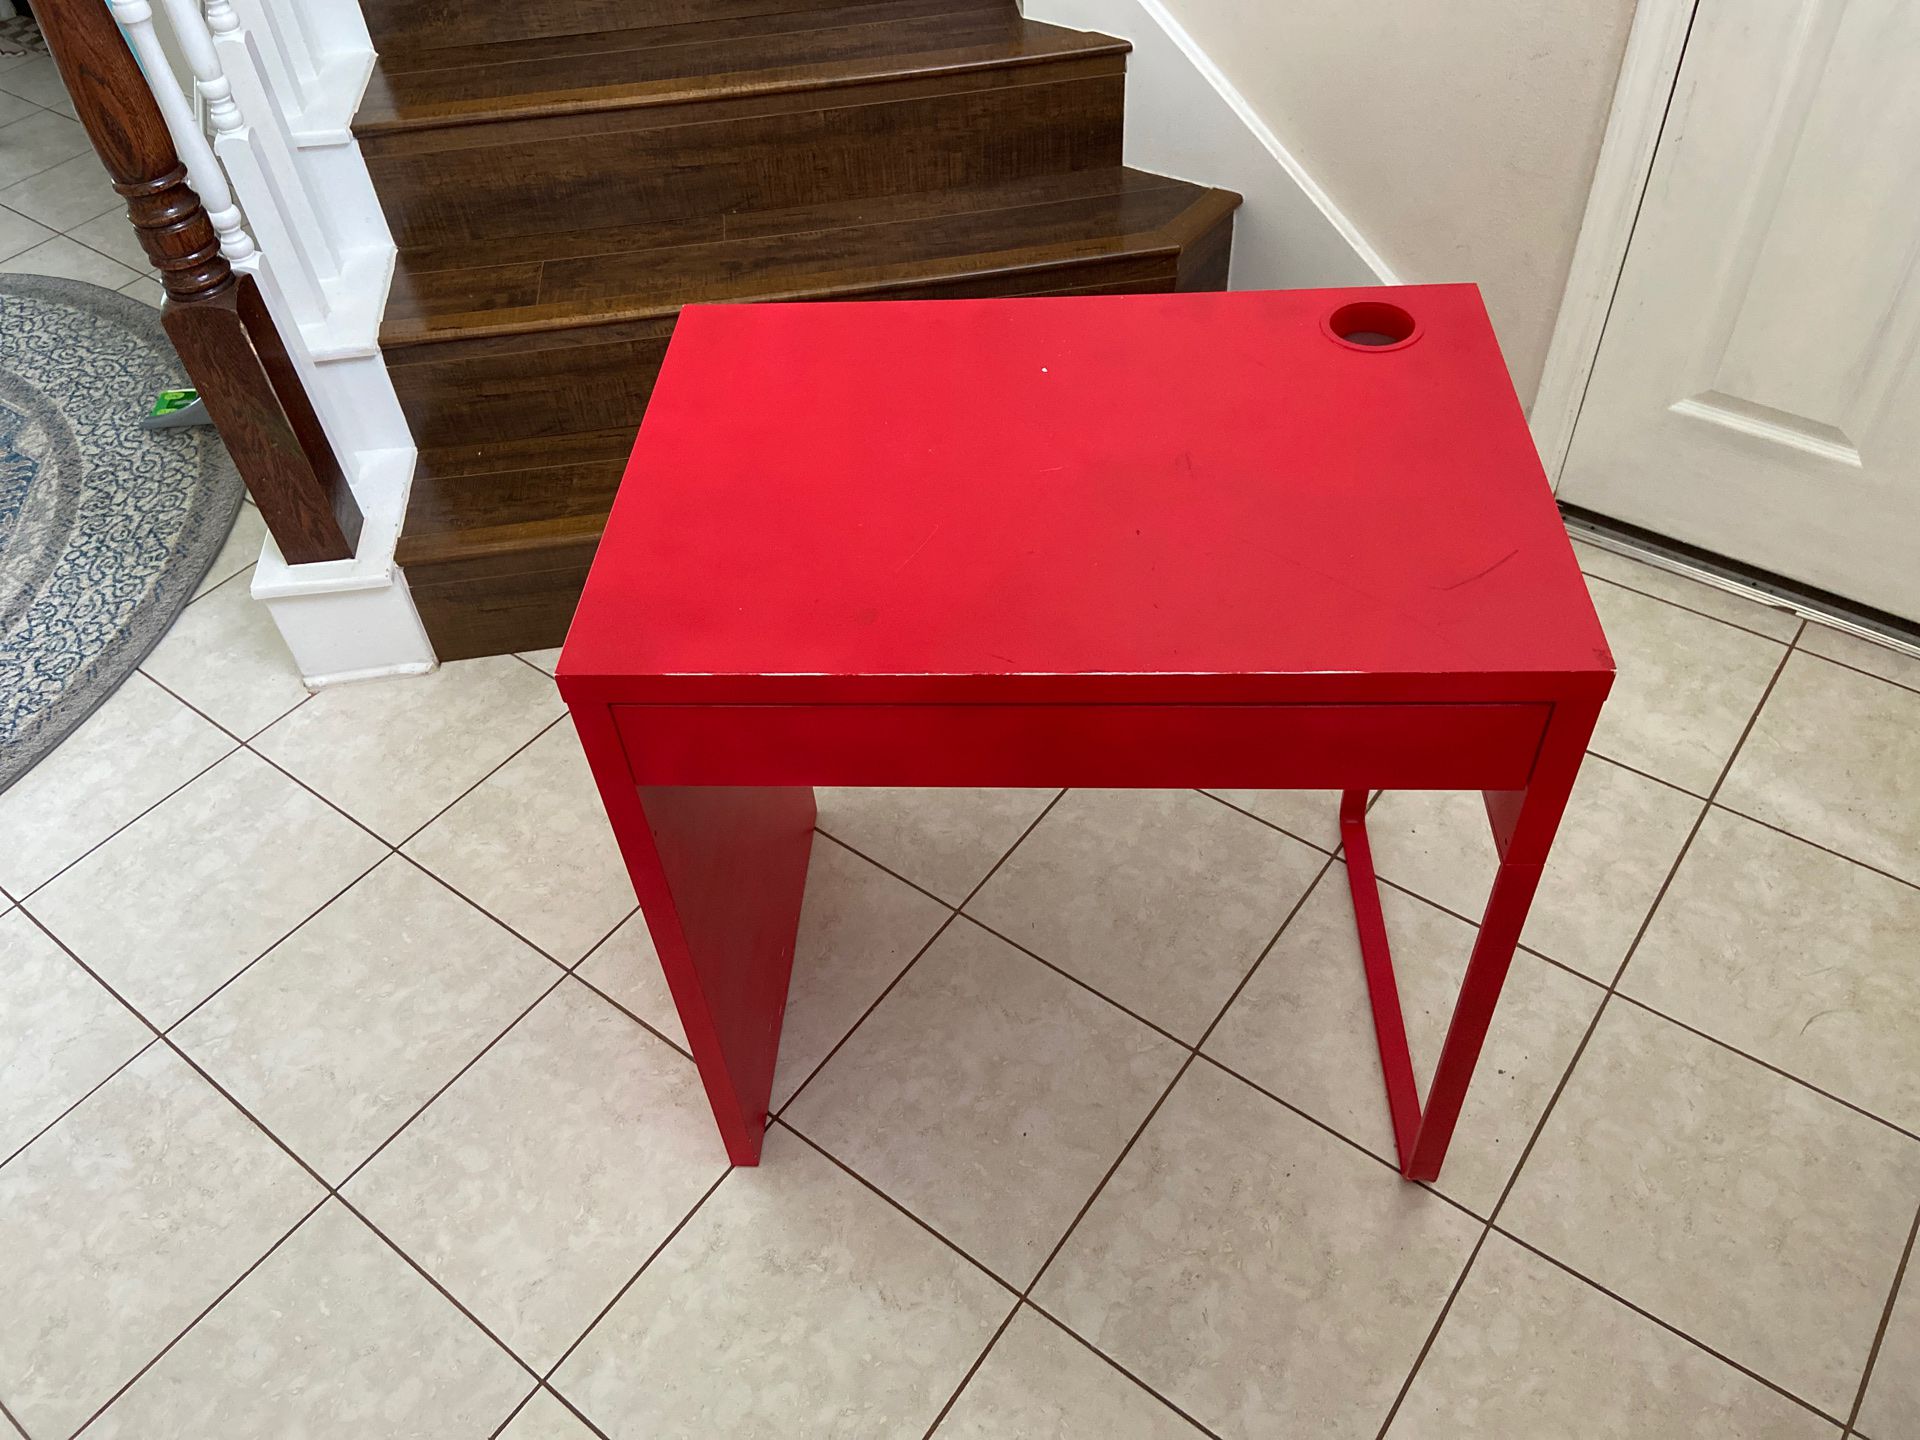 IKEA study desk with drawer, painted red